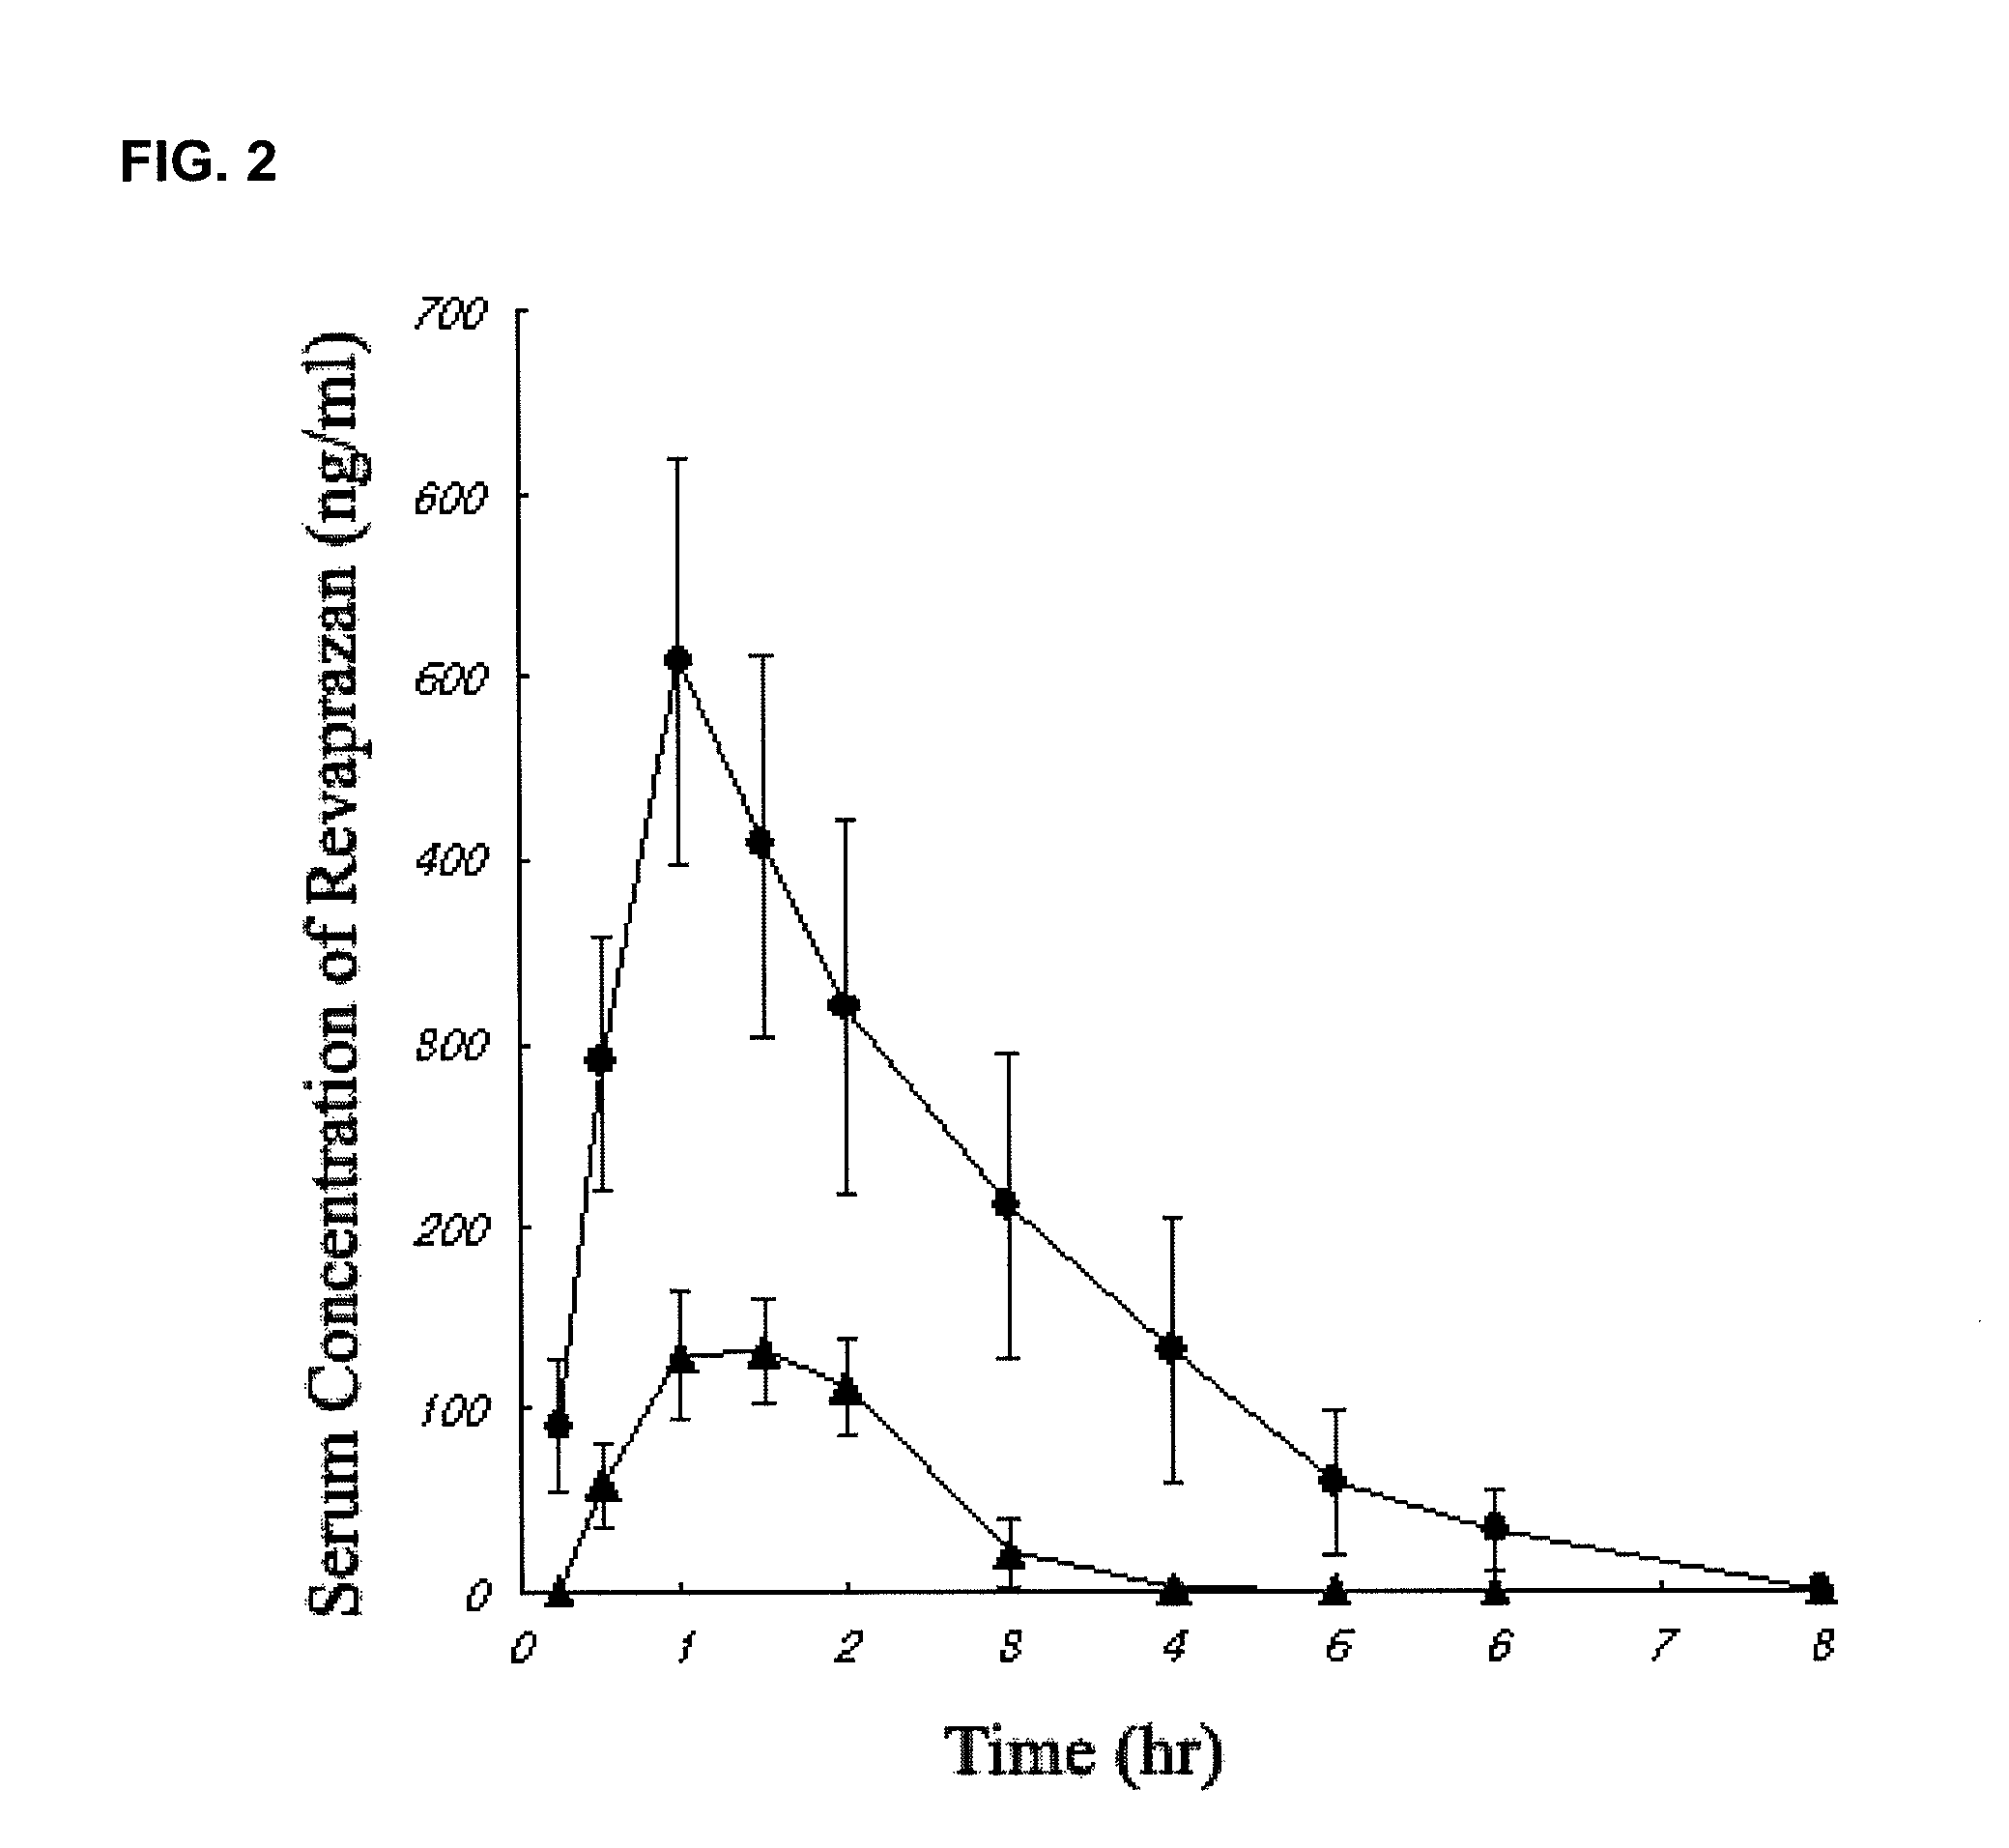 Revaprazan-containing solid dispersion and process for the preparation thereof